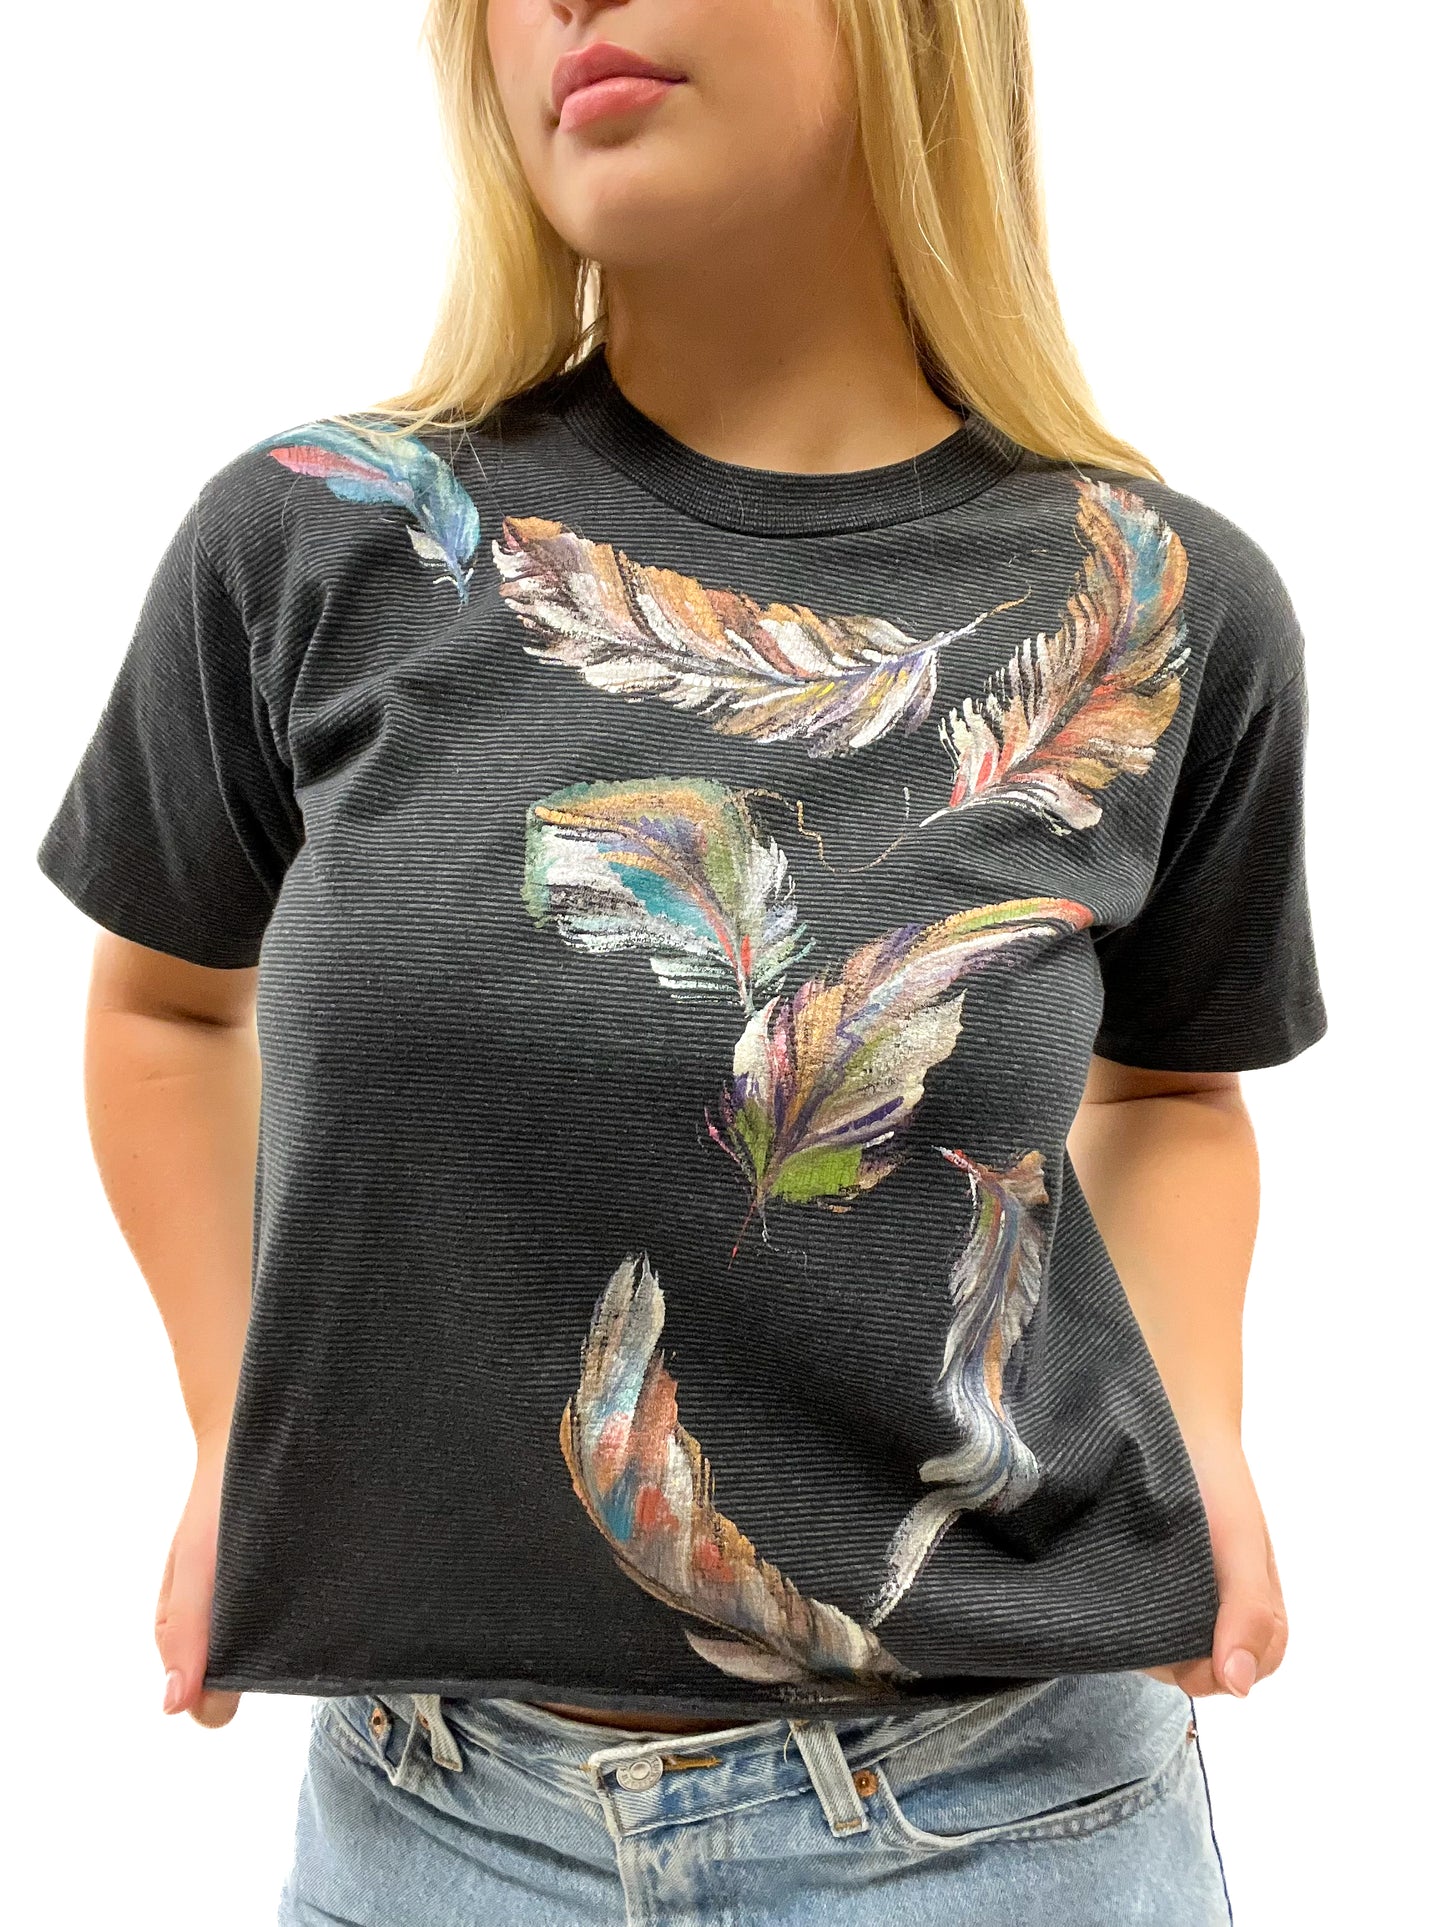 90s Tennessee Feathers Tee